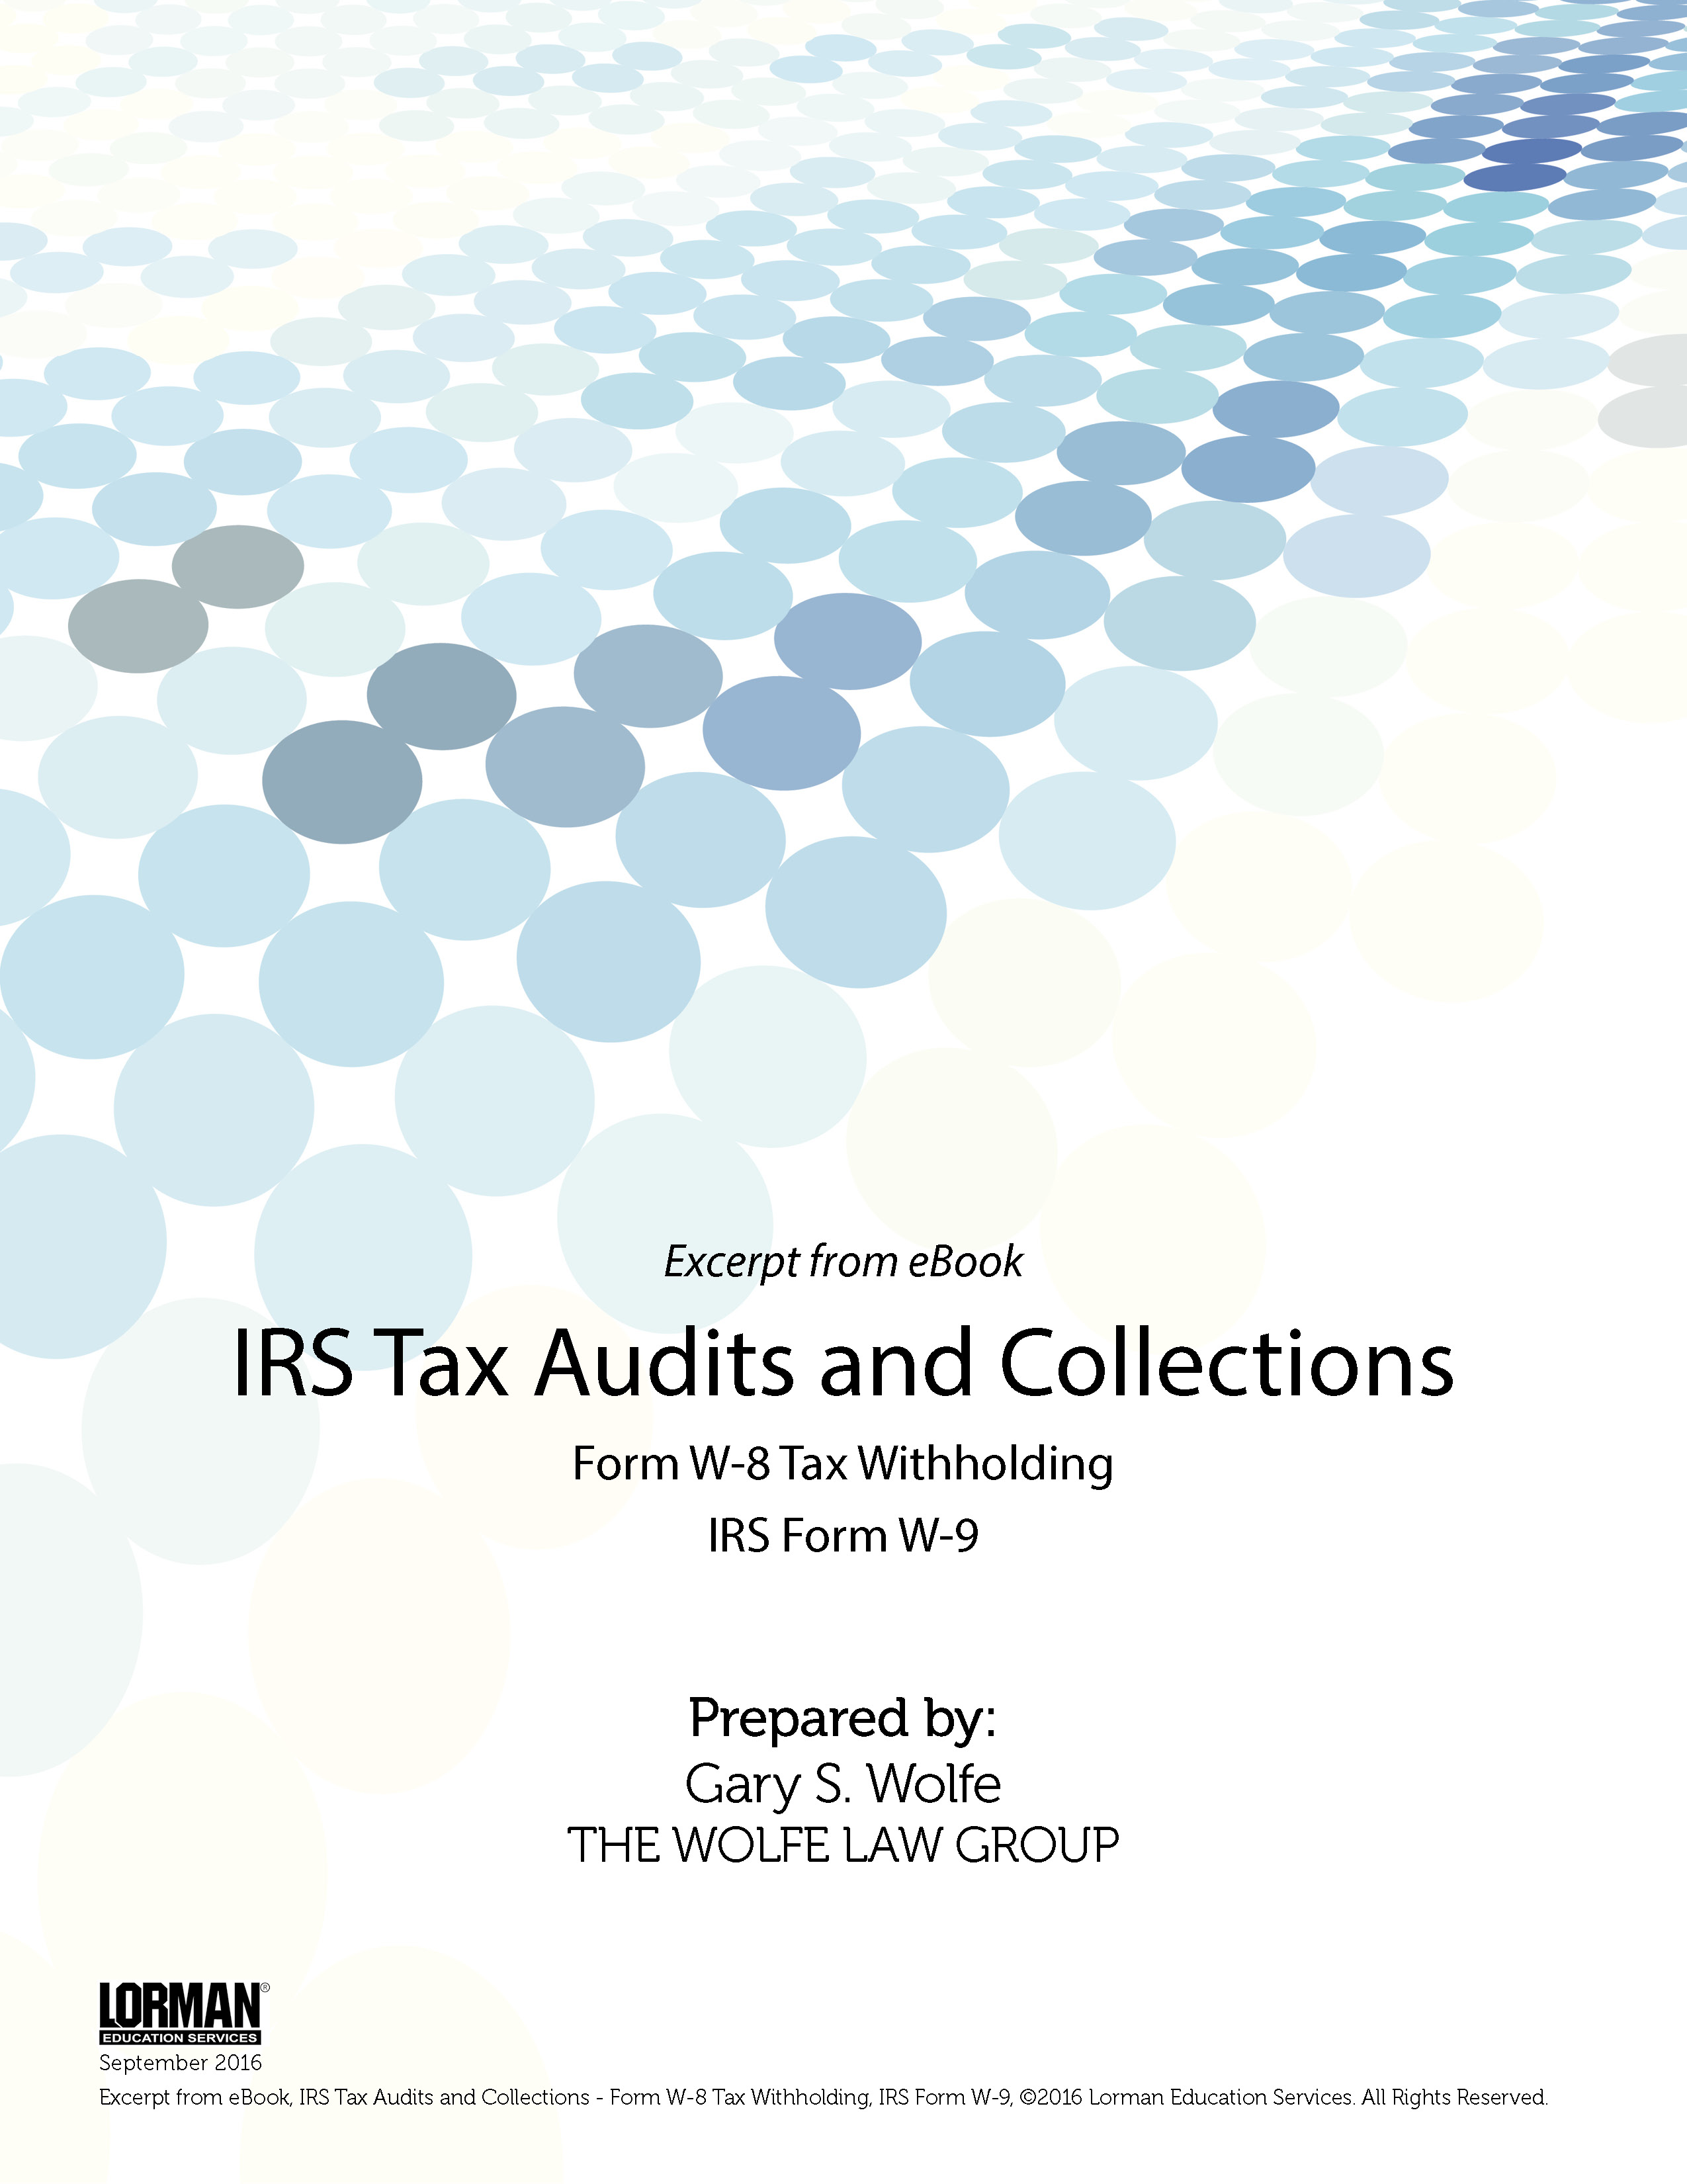 IRS Tax Audits and Collections: Form W-8 Tax Withholding, IRS Form W-9